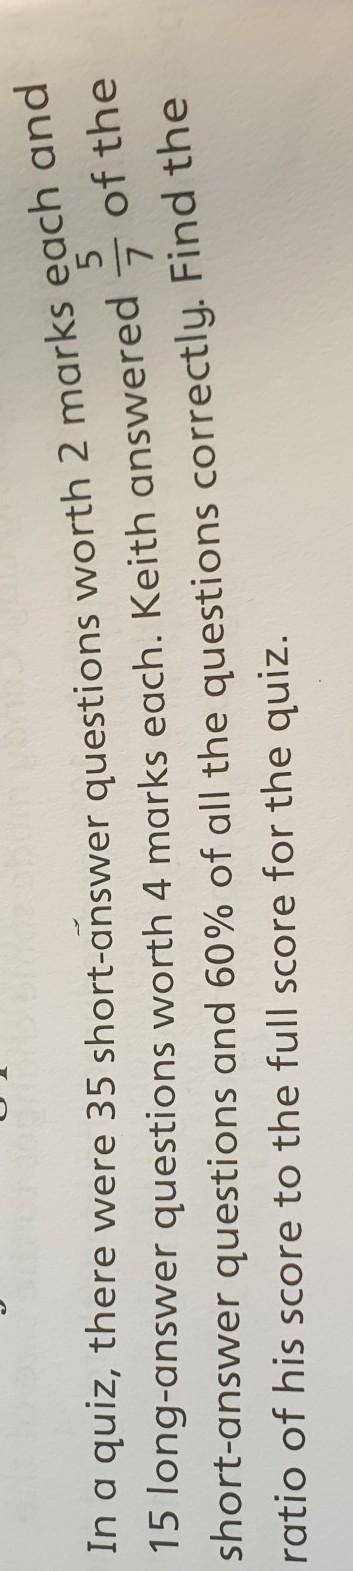 Stuck on a maths question please help with an explanation thank you stay safe :)​